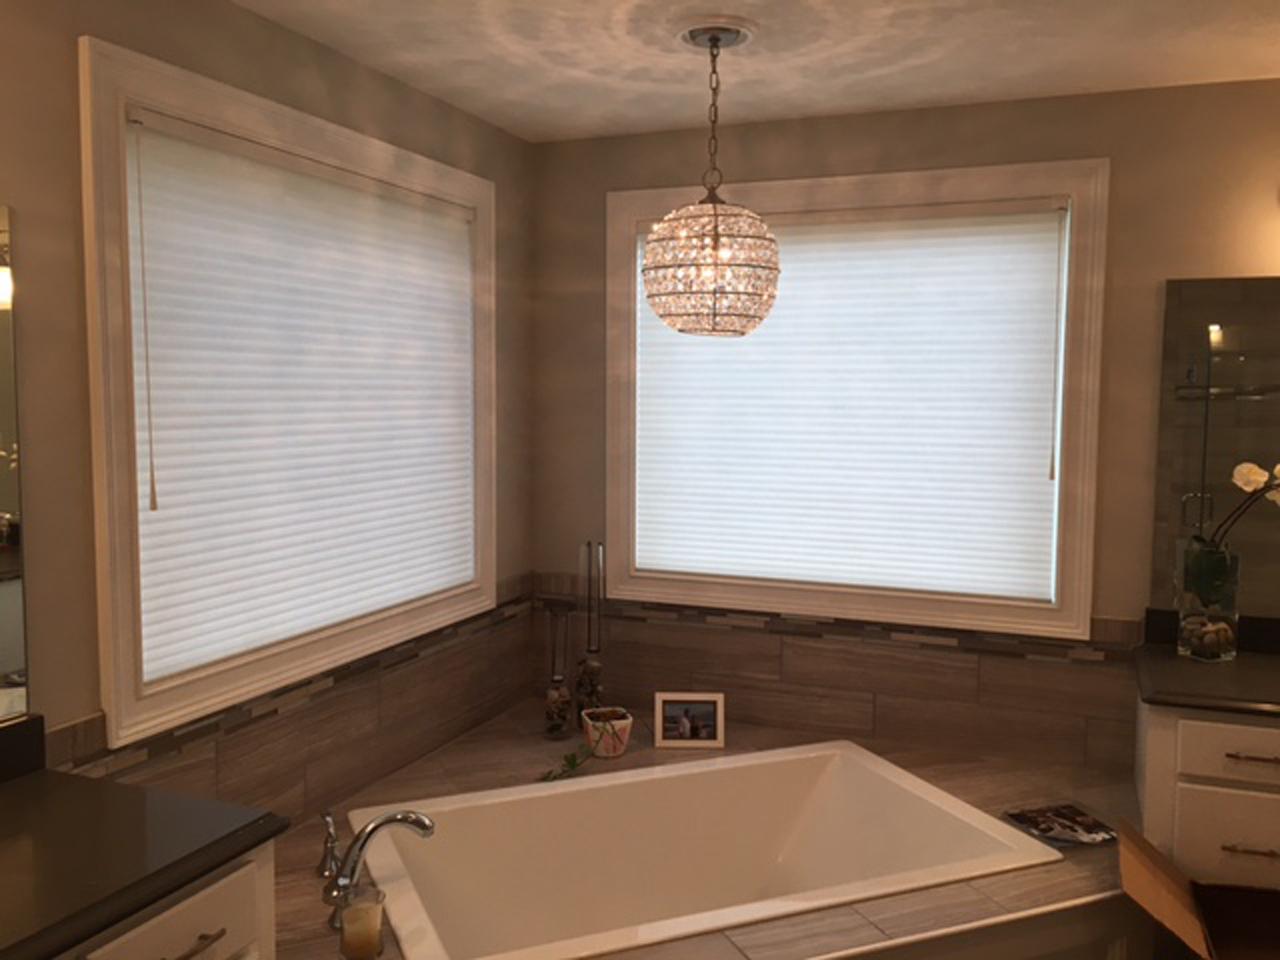 Duette shades in bathroom